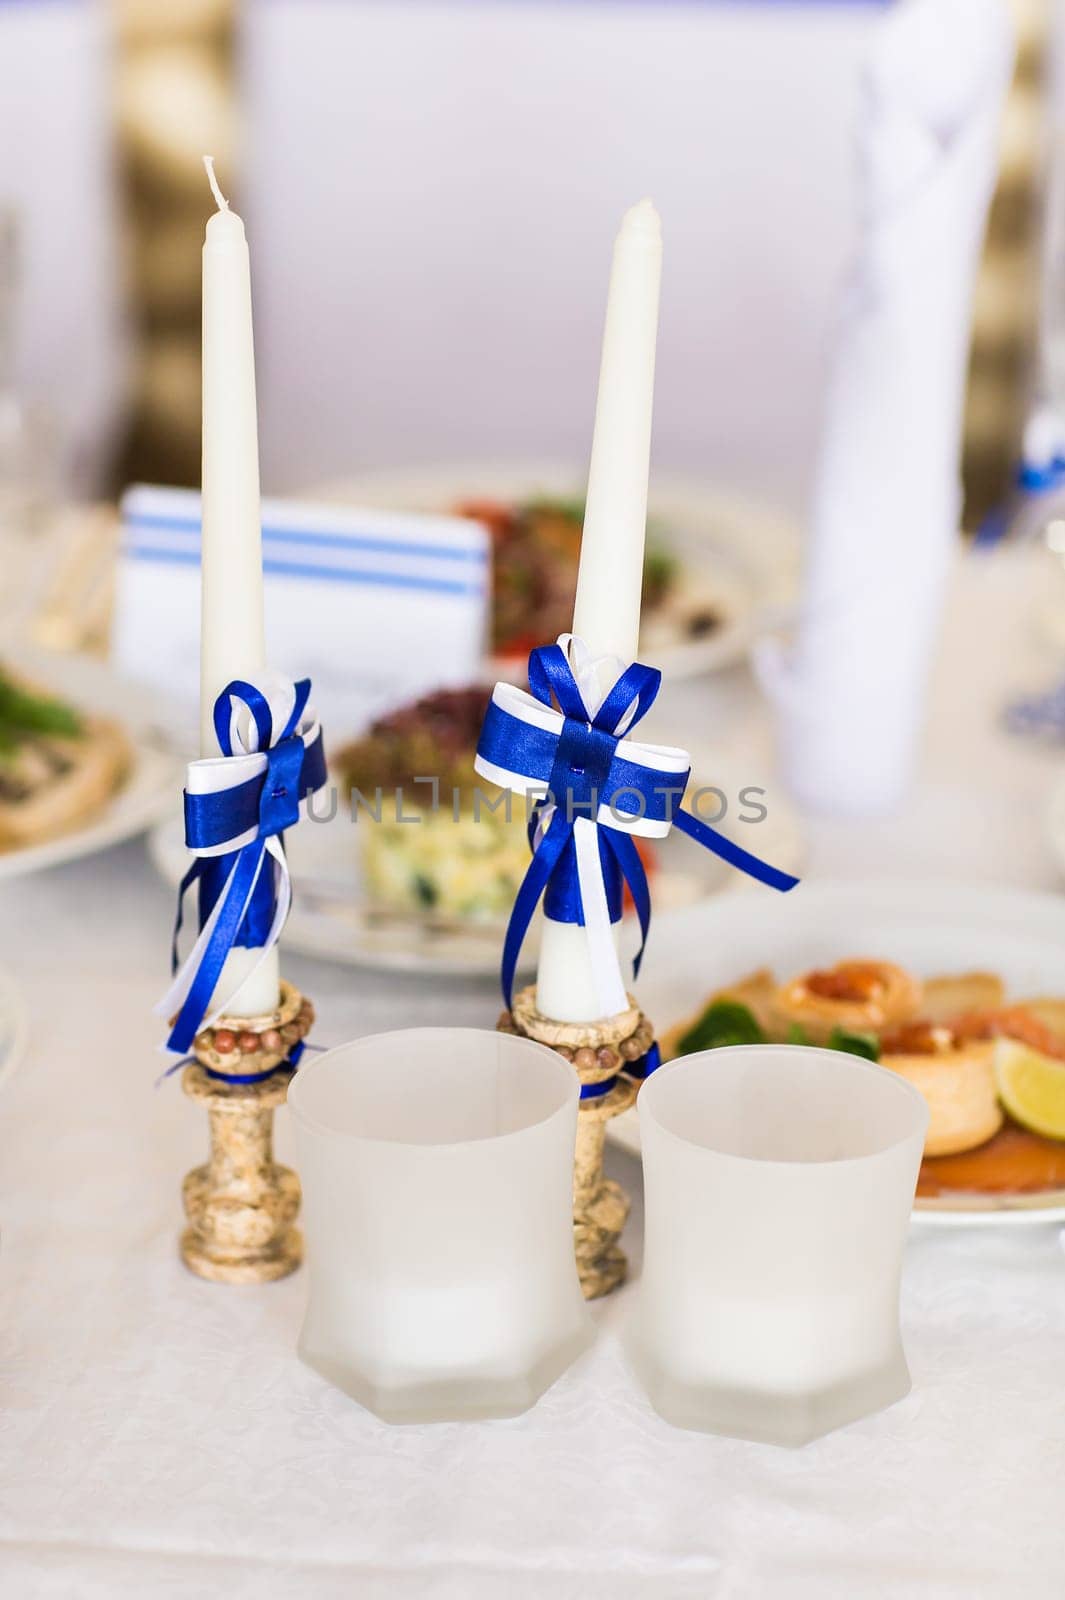 white wedding candles by Satura86